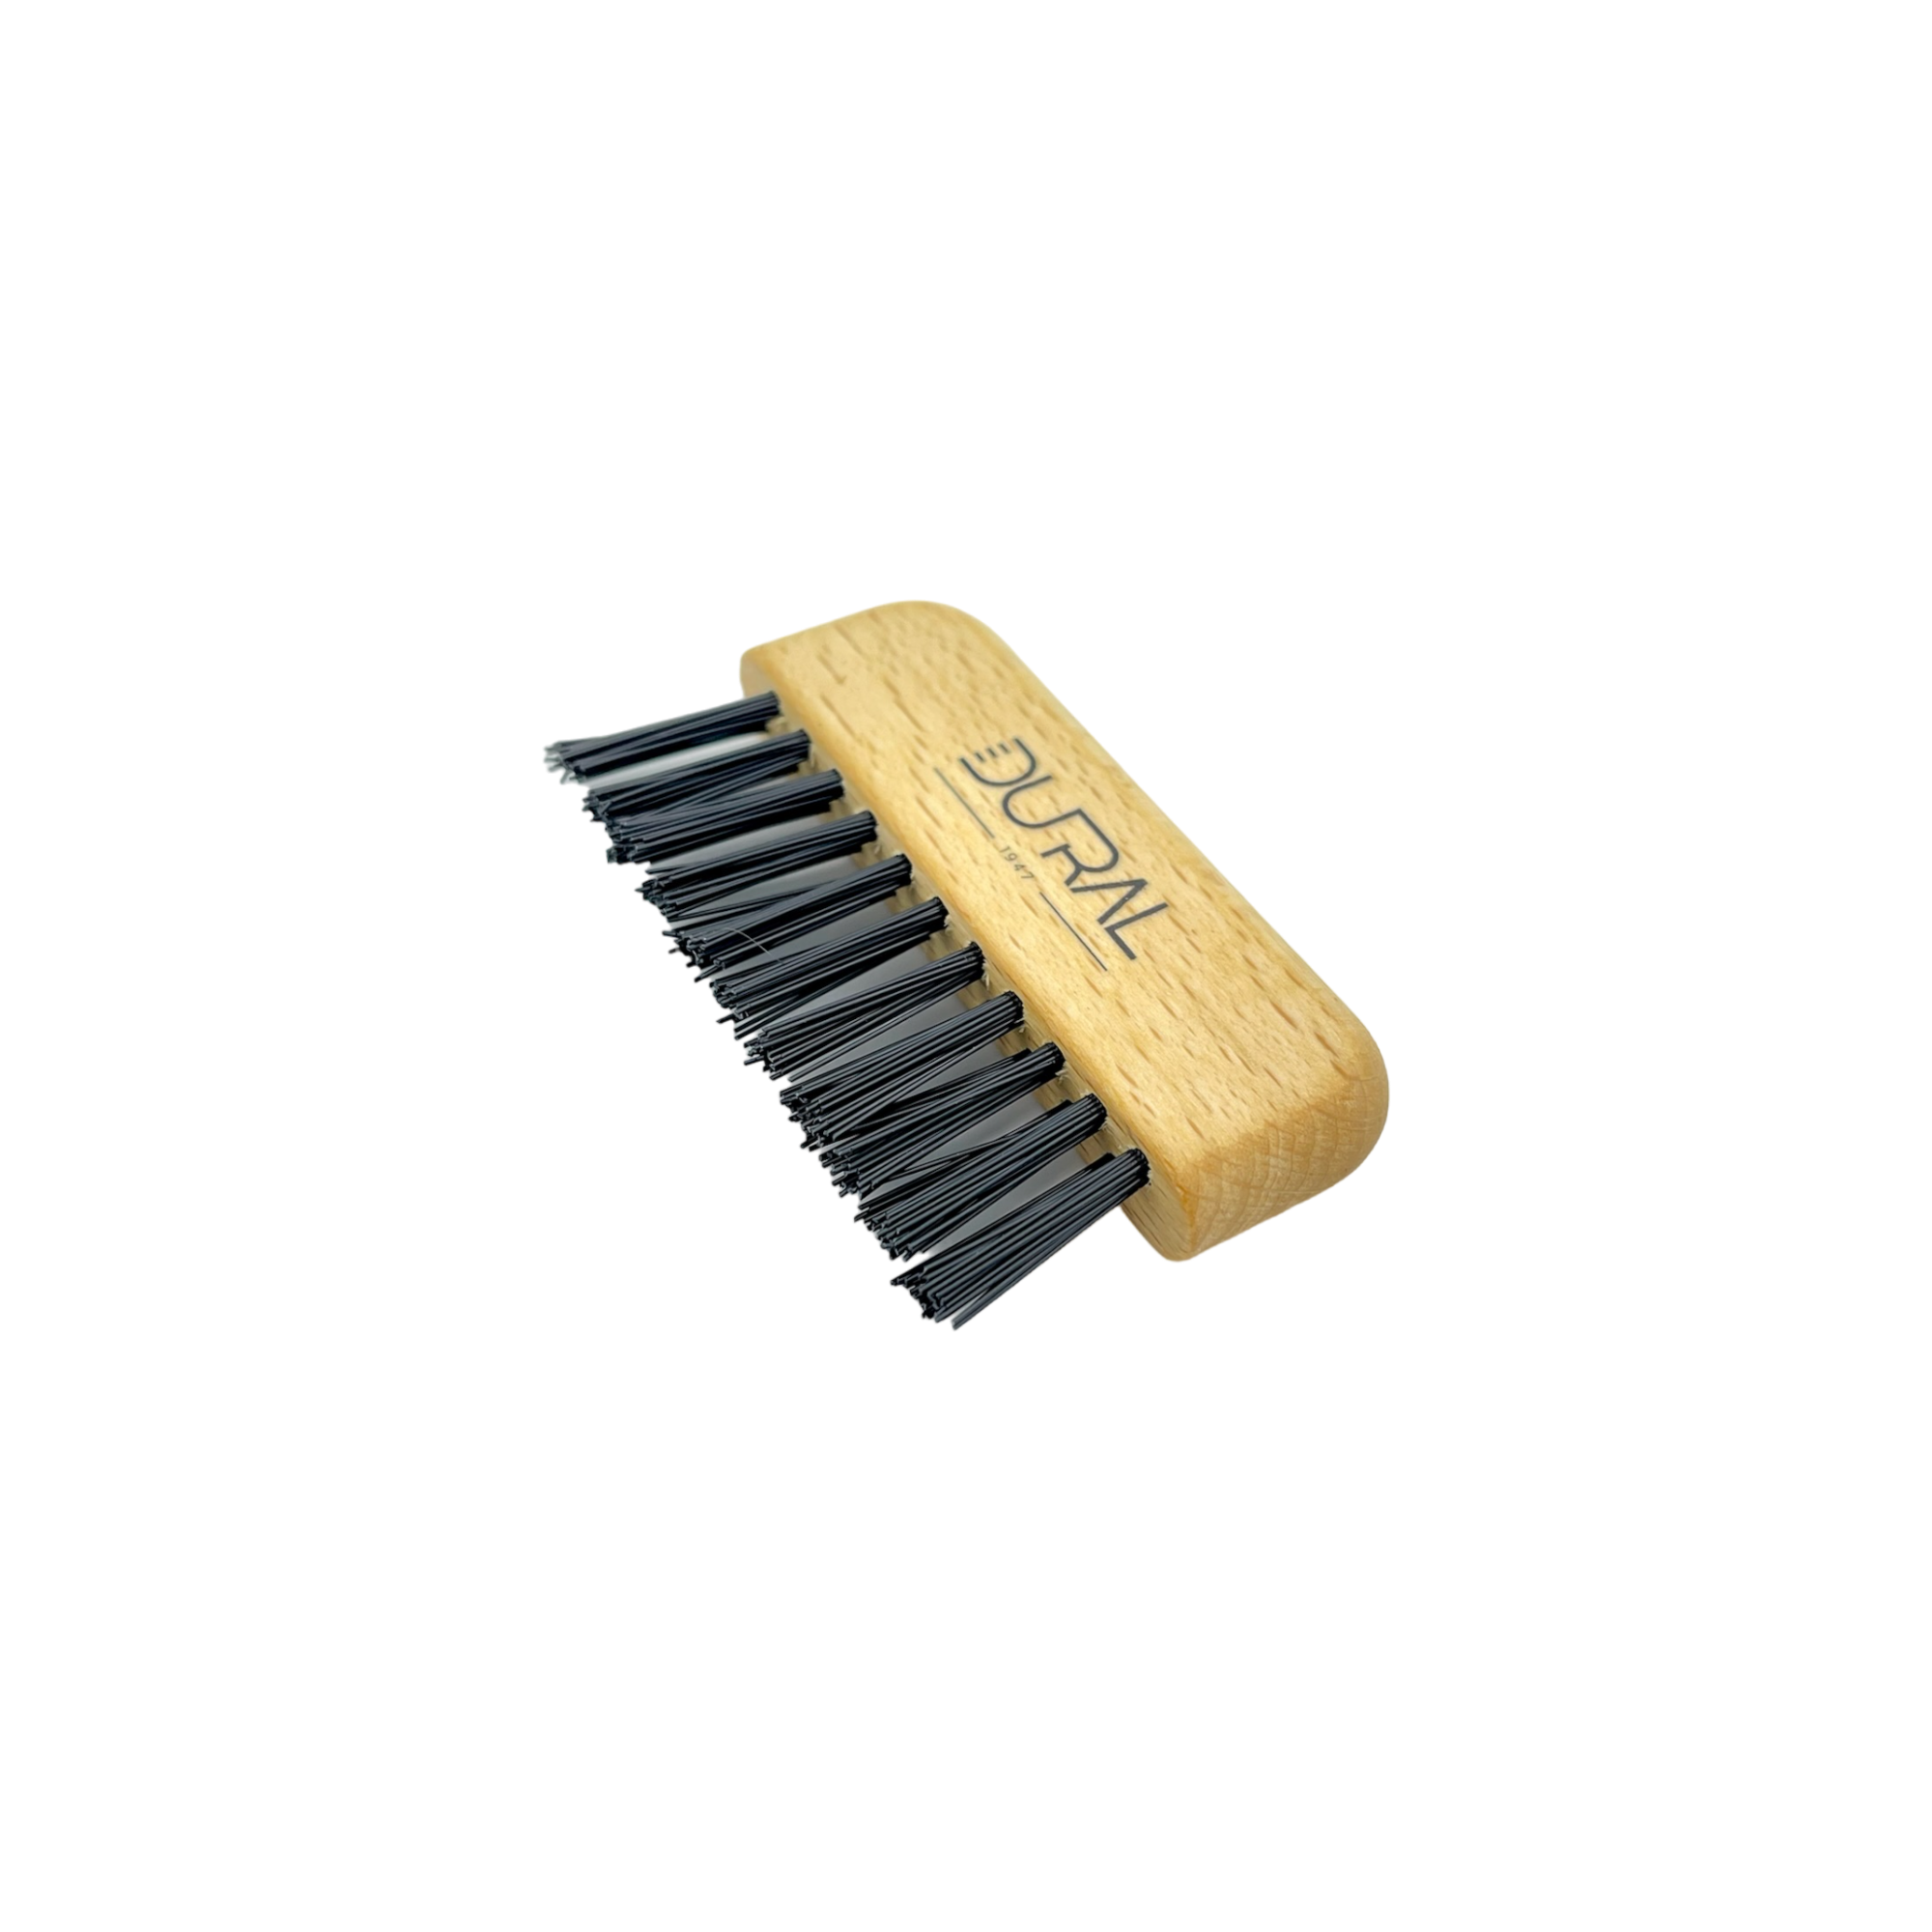 Dural Beech wood brush & comb cleaner with nylon bristles